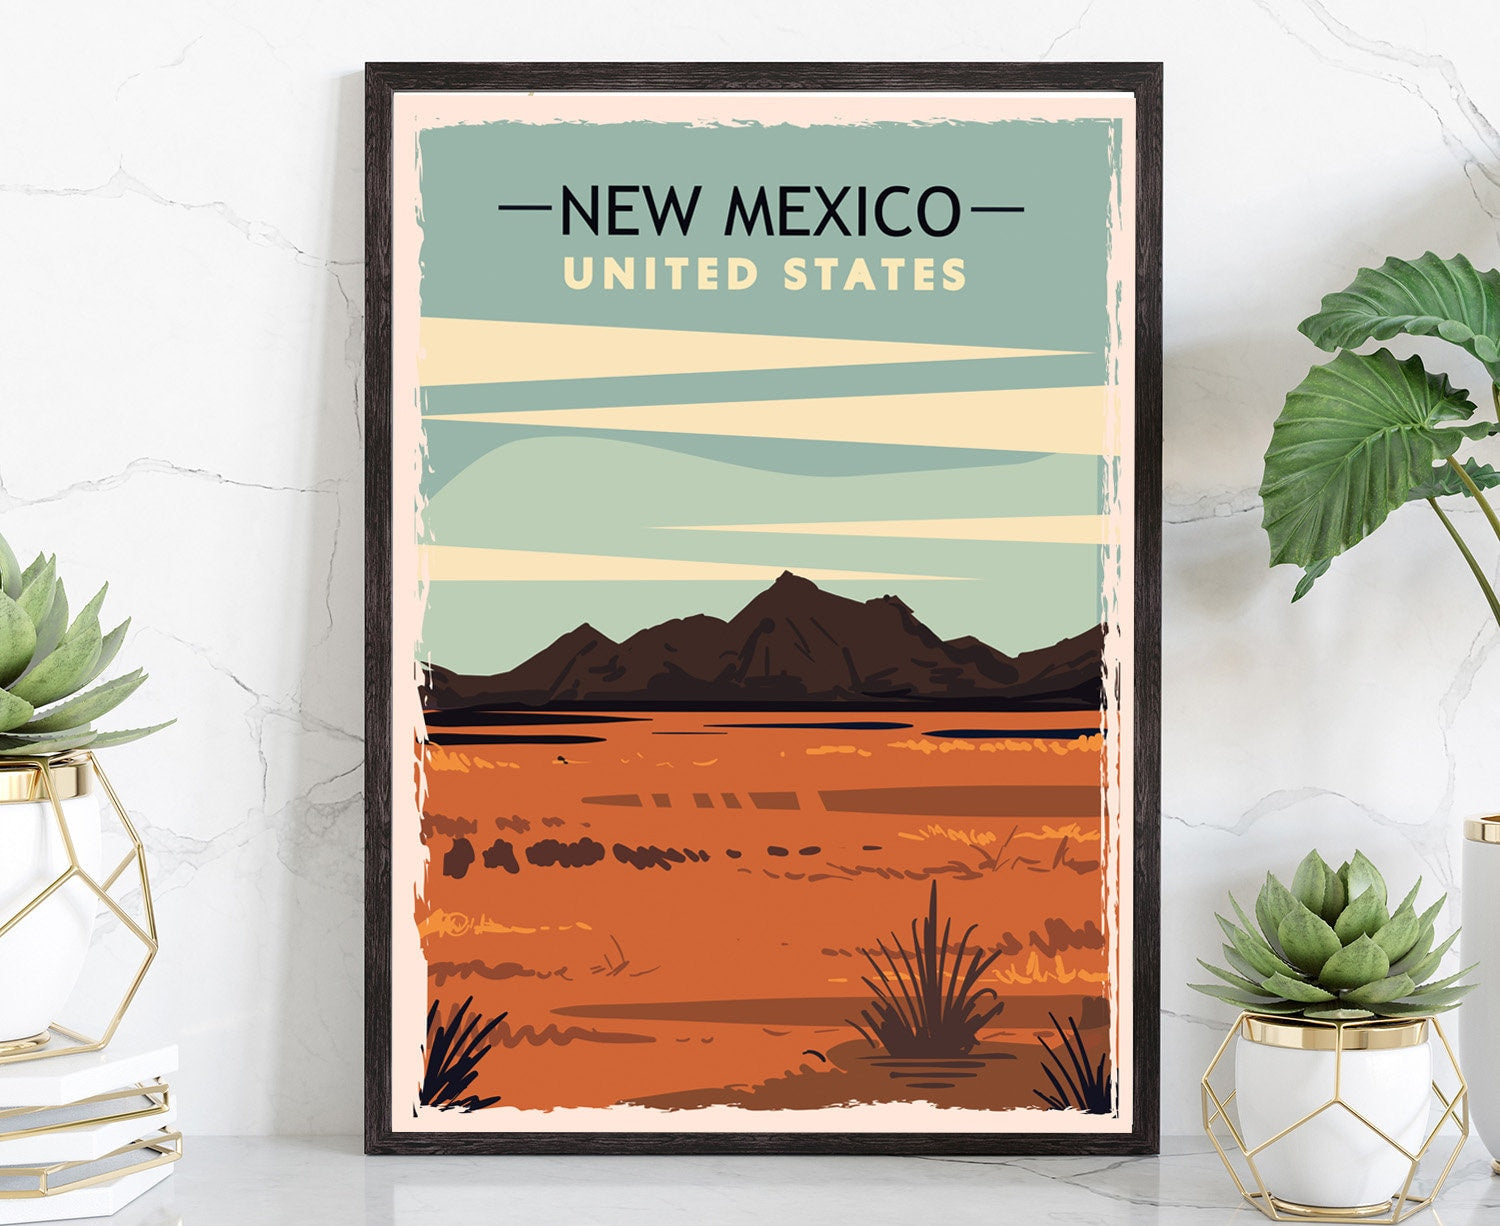 New Mexico Vintage Rustic Poster Print, Retro Style Travel Poster